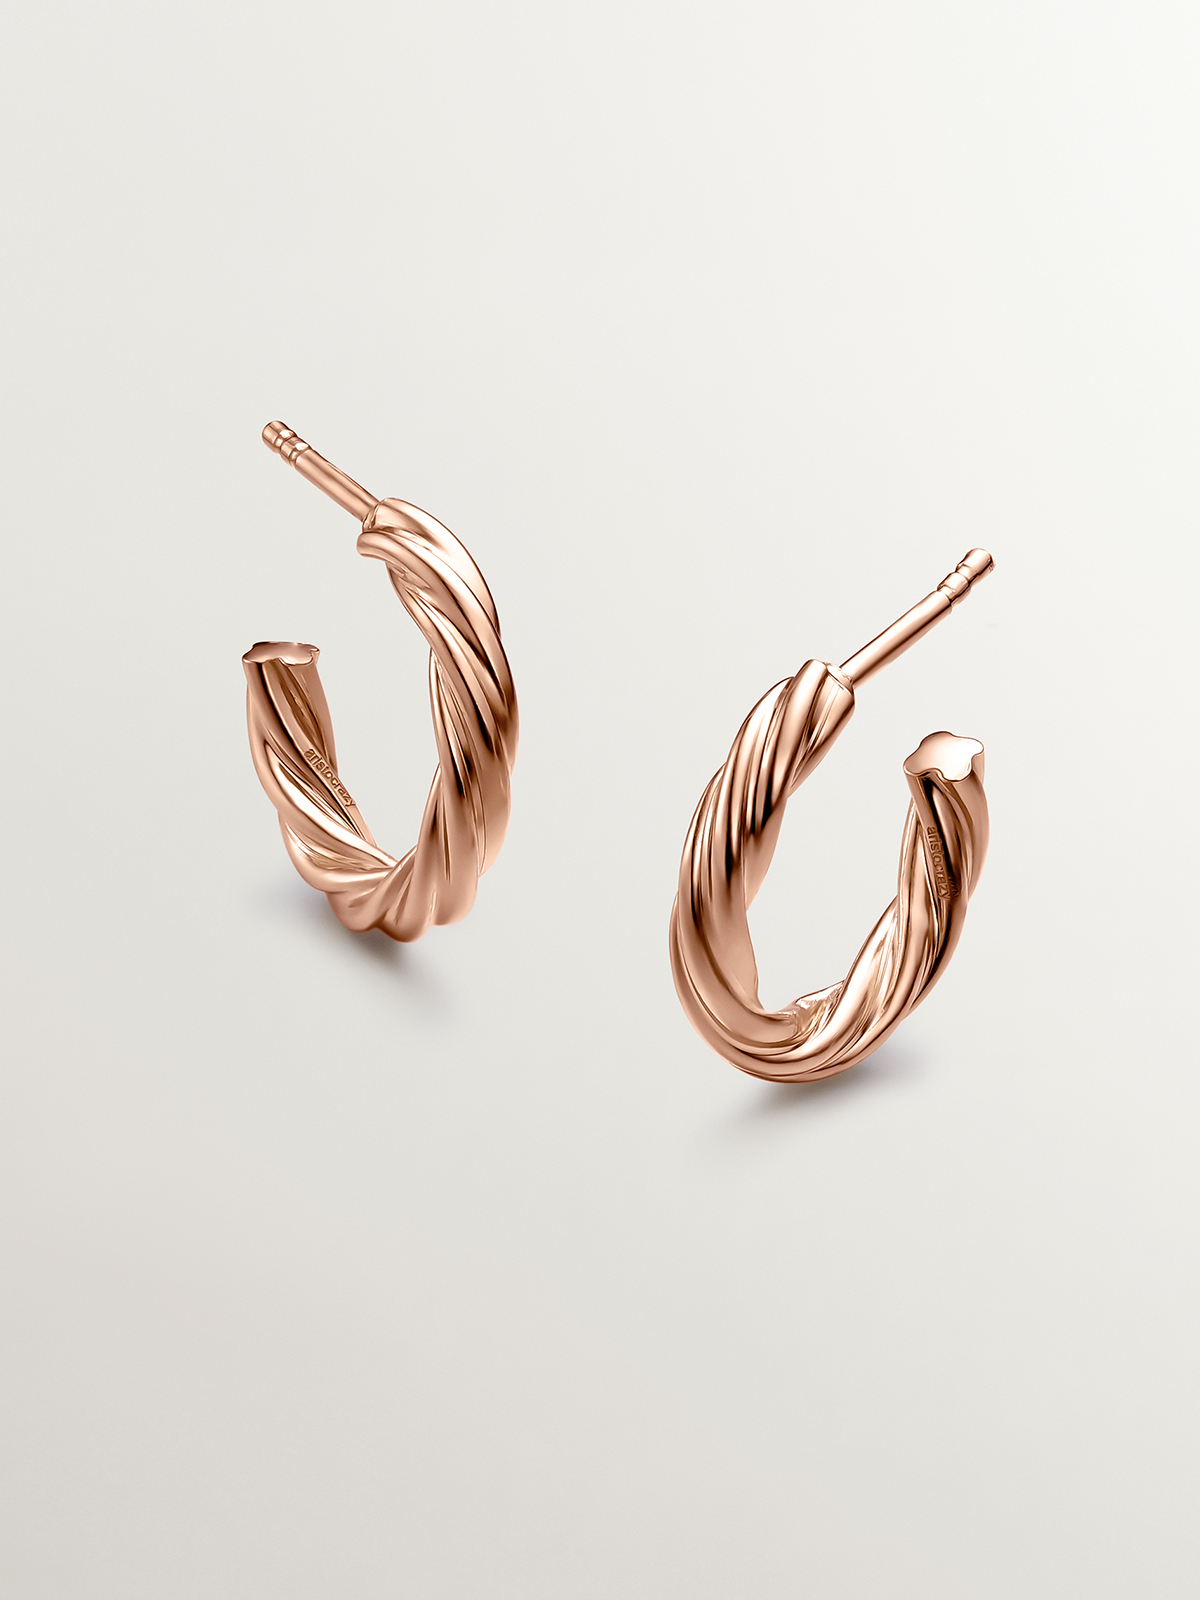 Medium-sized hoop earrings made from 925 silver, bathed in 18K rose gold with a textured gallon finish.